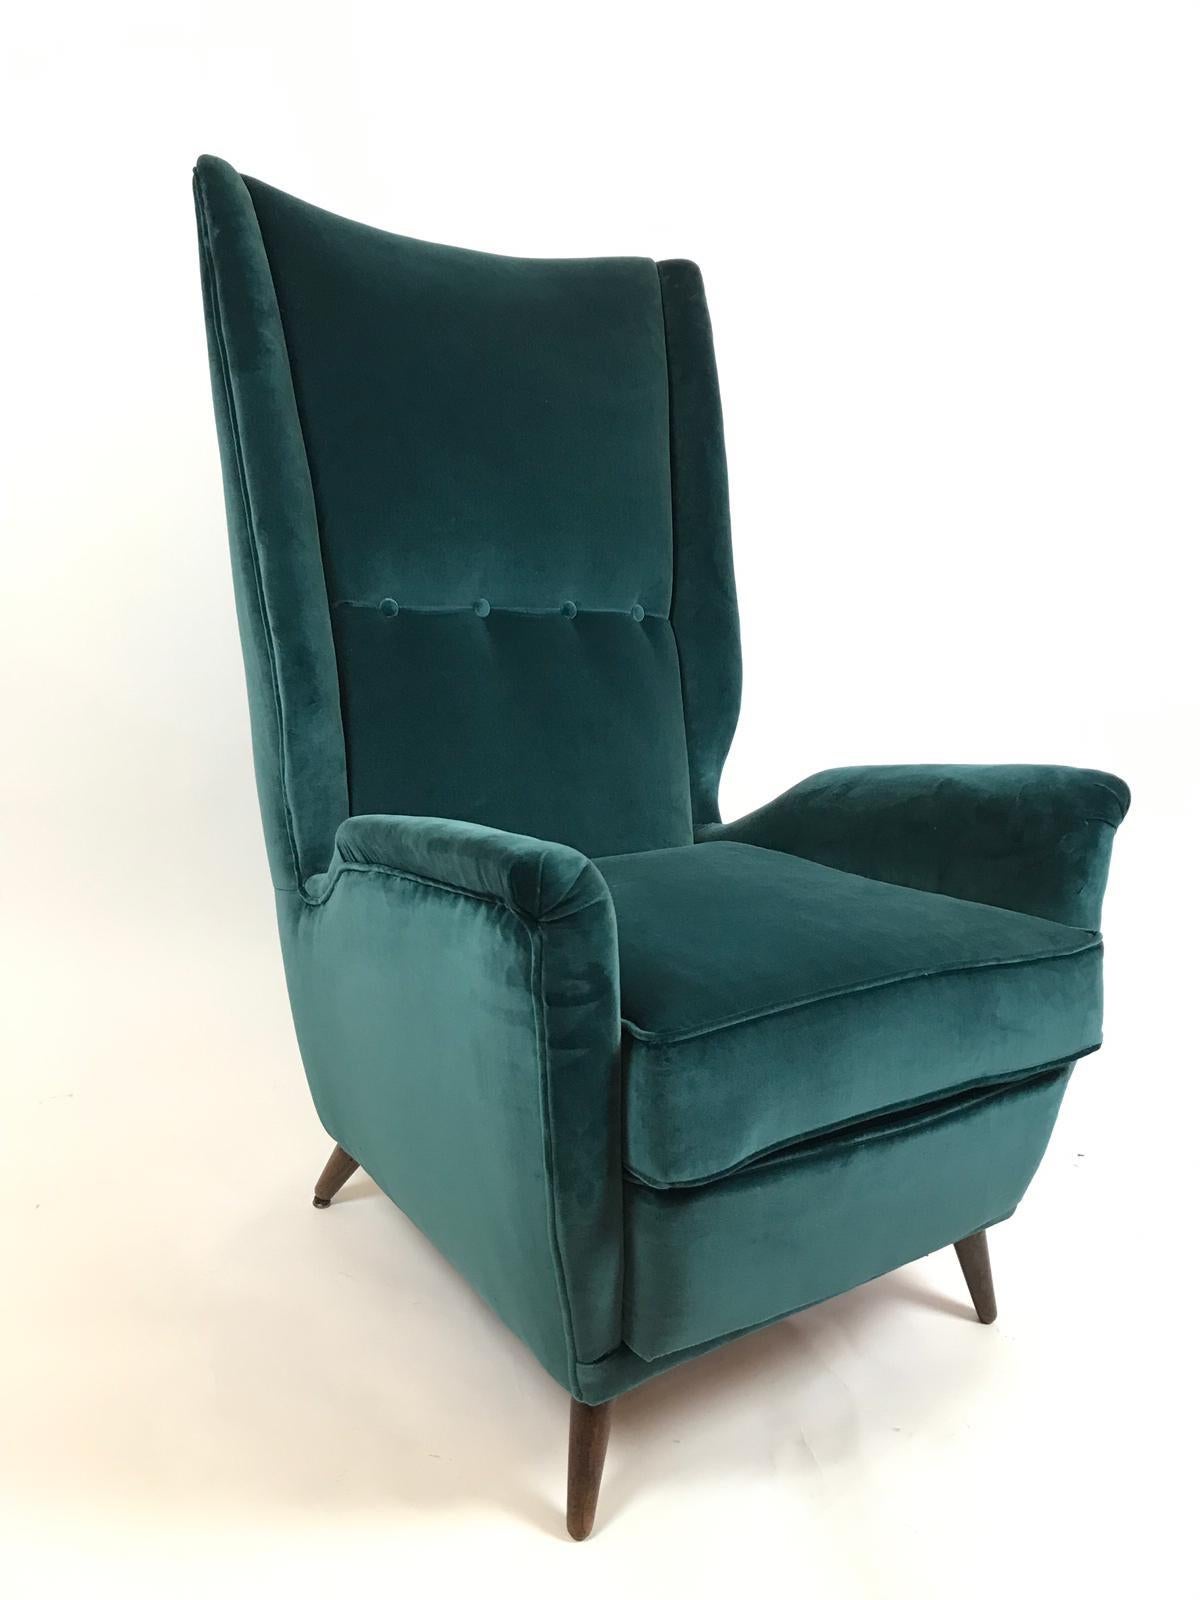 Gio Ponti Pair of High Back Armchairs Newly Upholstered in Teal Velvet (Moderne der Mitte des Jahrhunderts)